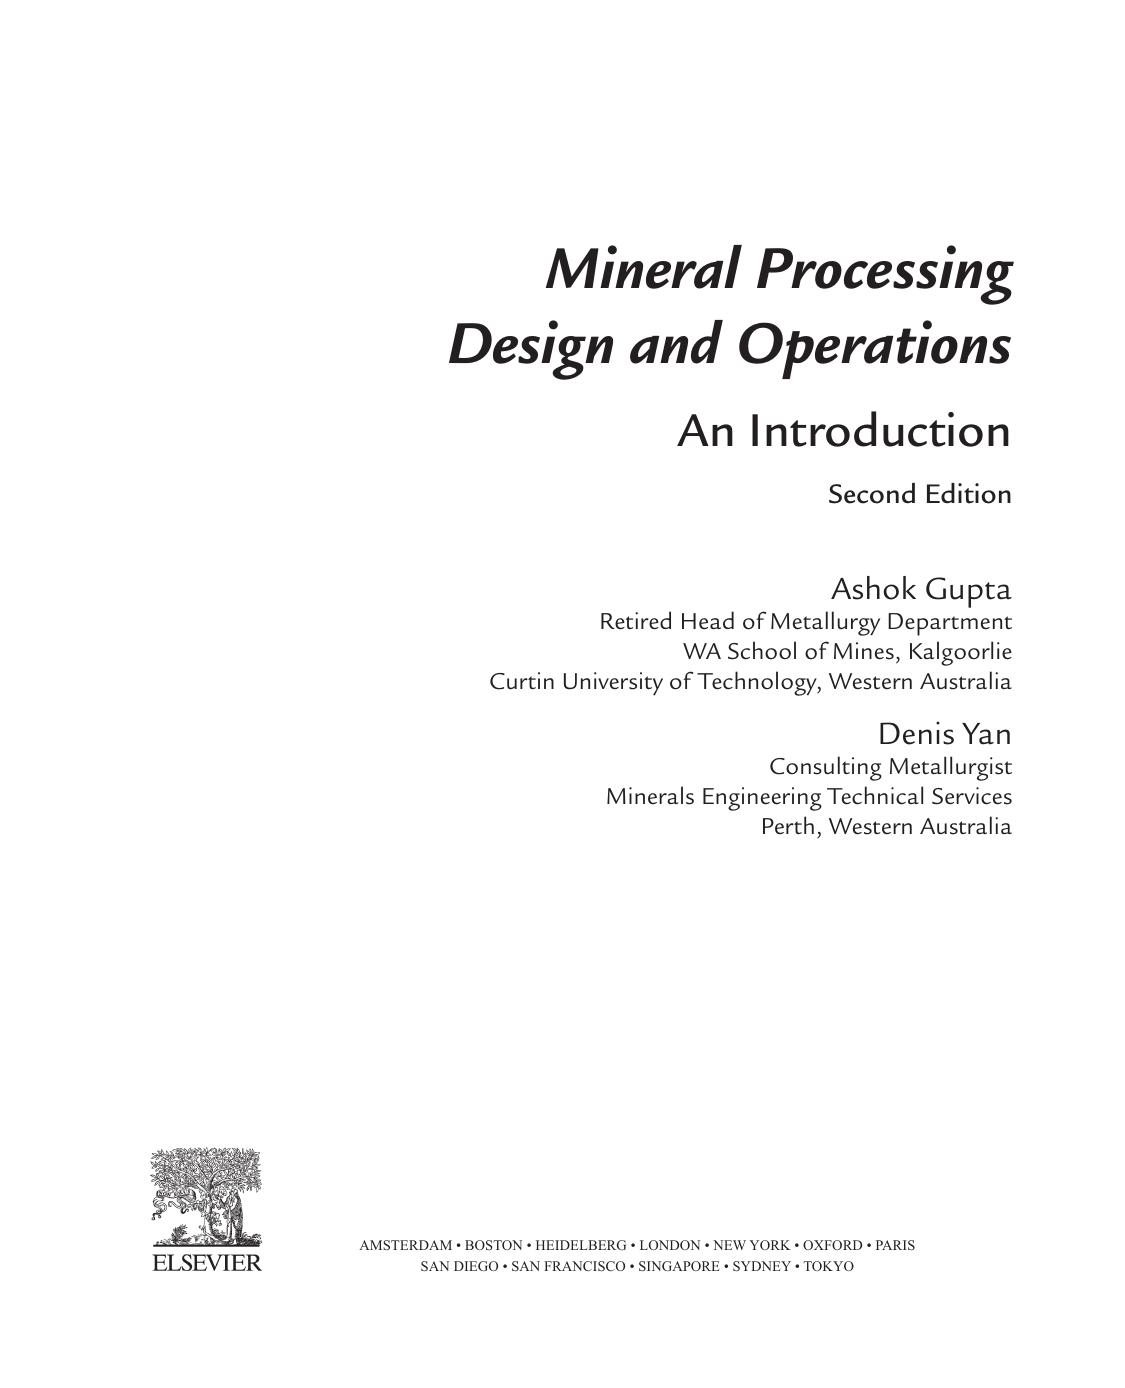 Mineral Processing Design and Operations. An Introduction 2016